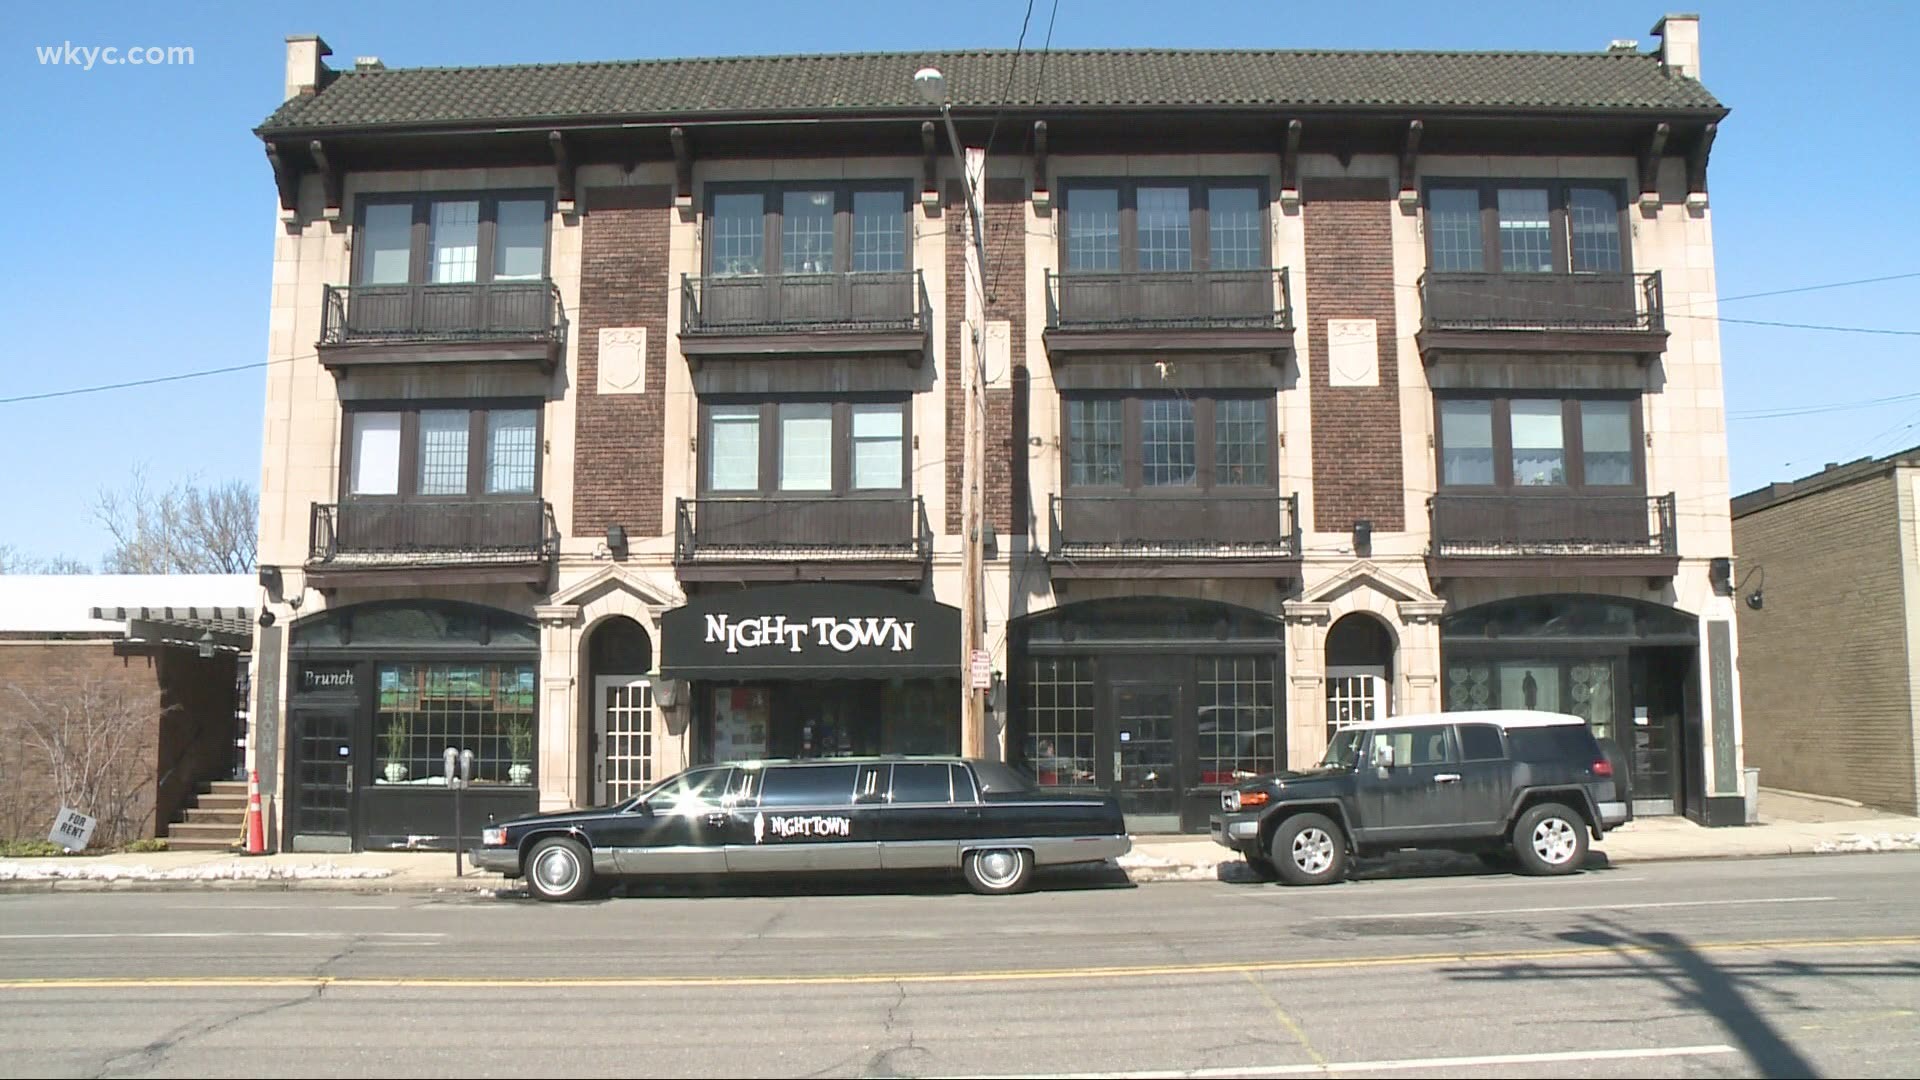 A big change is coming to one of the east side's most iconic locations. 3News has learned that owner Brendan Ring has sold Nighttown.